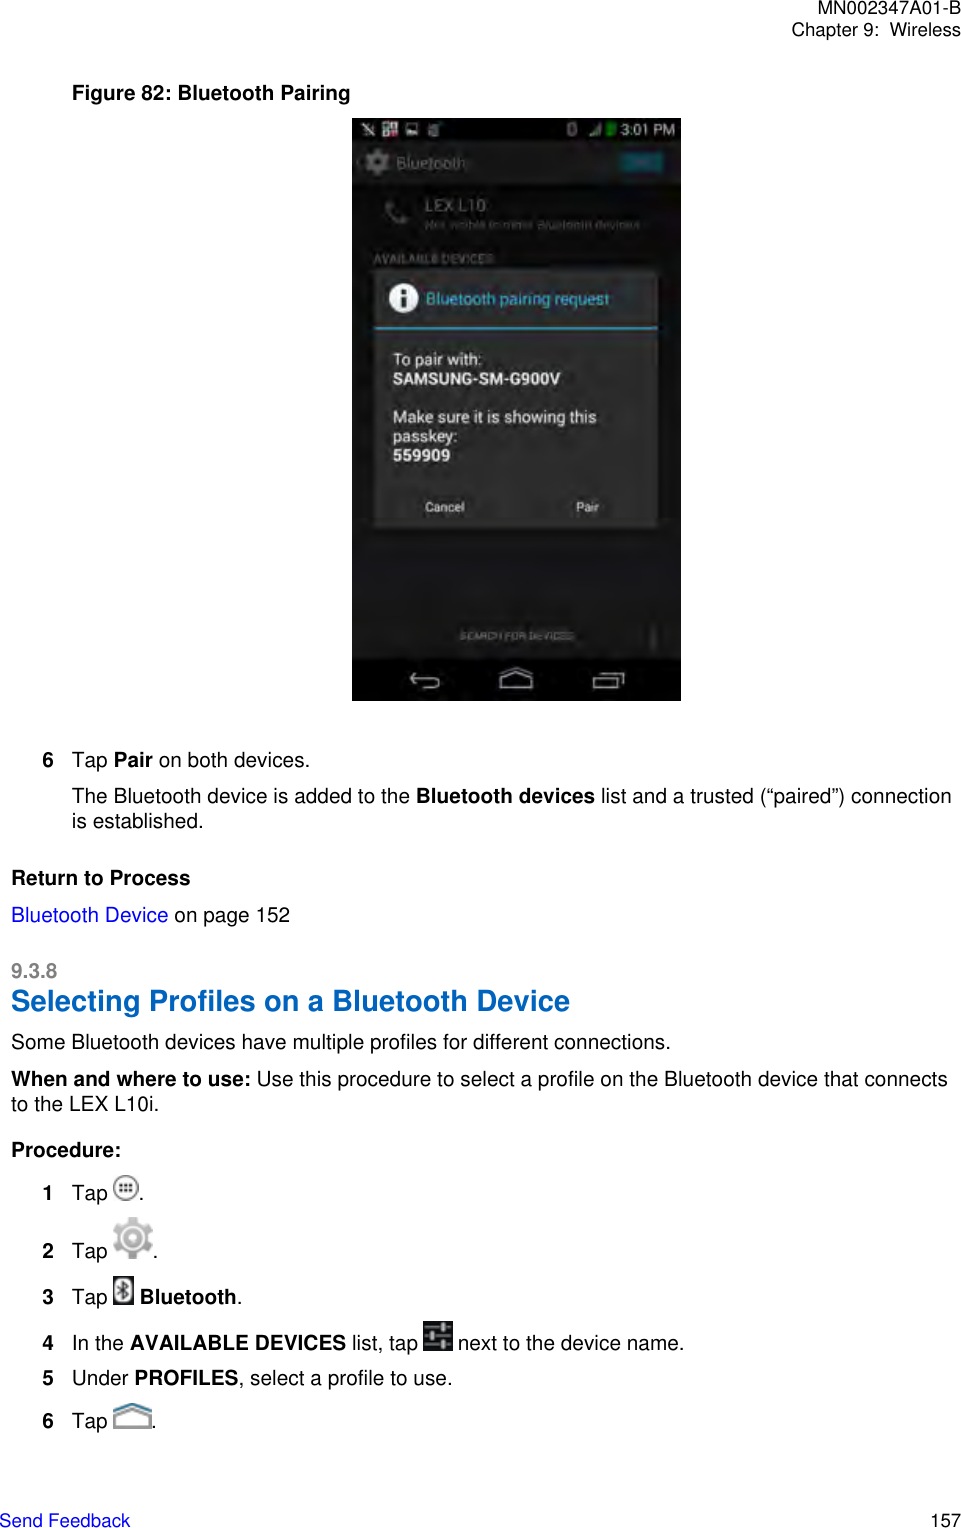 Figure 82: Bluetooth Pairing6Tap Pair on both devices.The Bluetooth device is added to the Bluetooth devices list and a trusted (“paired”) connectionis established.Return to ProcessBluetooth Device on page 1529.3.8Selecting Profiles on a Bluetooth DeviceSome Bluetooth devices have multiple profiles for different connections.When and where to use: Use this procedure to select a profile on the Bluetooth device that connectsto the LEX L10i.Procedure:1Tap  .2Tap  .3Tap   Bluetooth.4In the AVAILABLE DEVICES list, tap   next to the device name.5Under PROFILES, select a profile to use.6Tap  .MN002347A01-BChapter 9:  WirelessSend Feedback   157